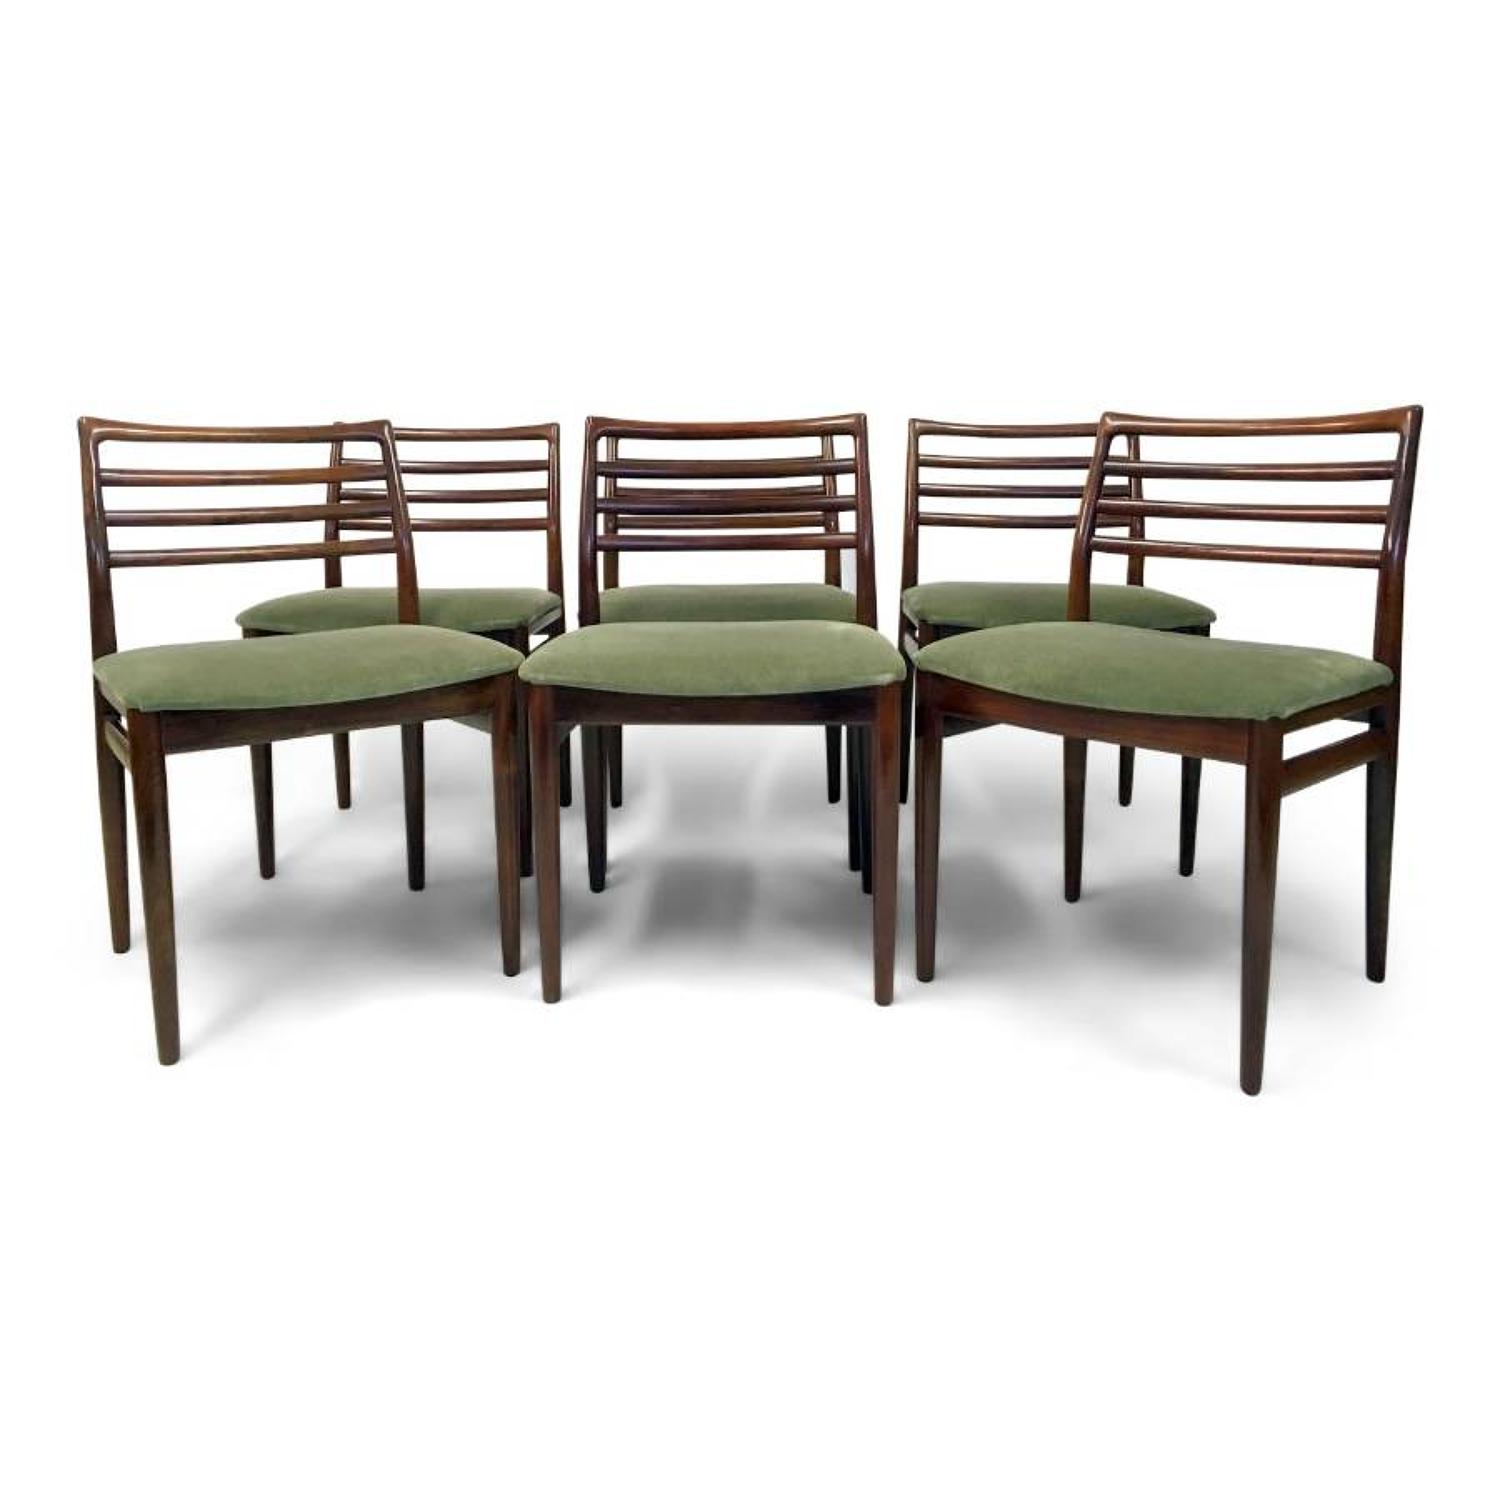 A set of six 1960s Danish rosewood dining chairs